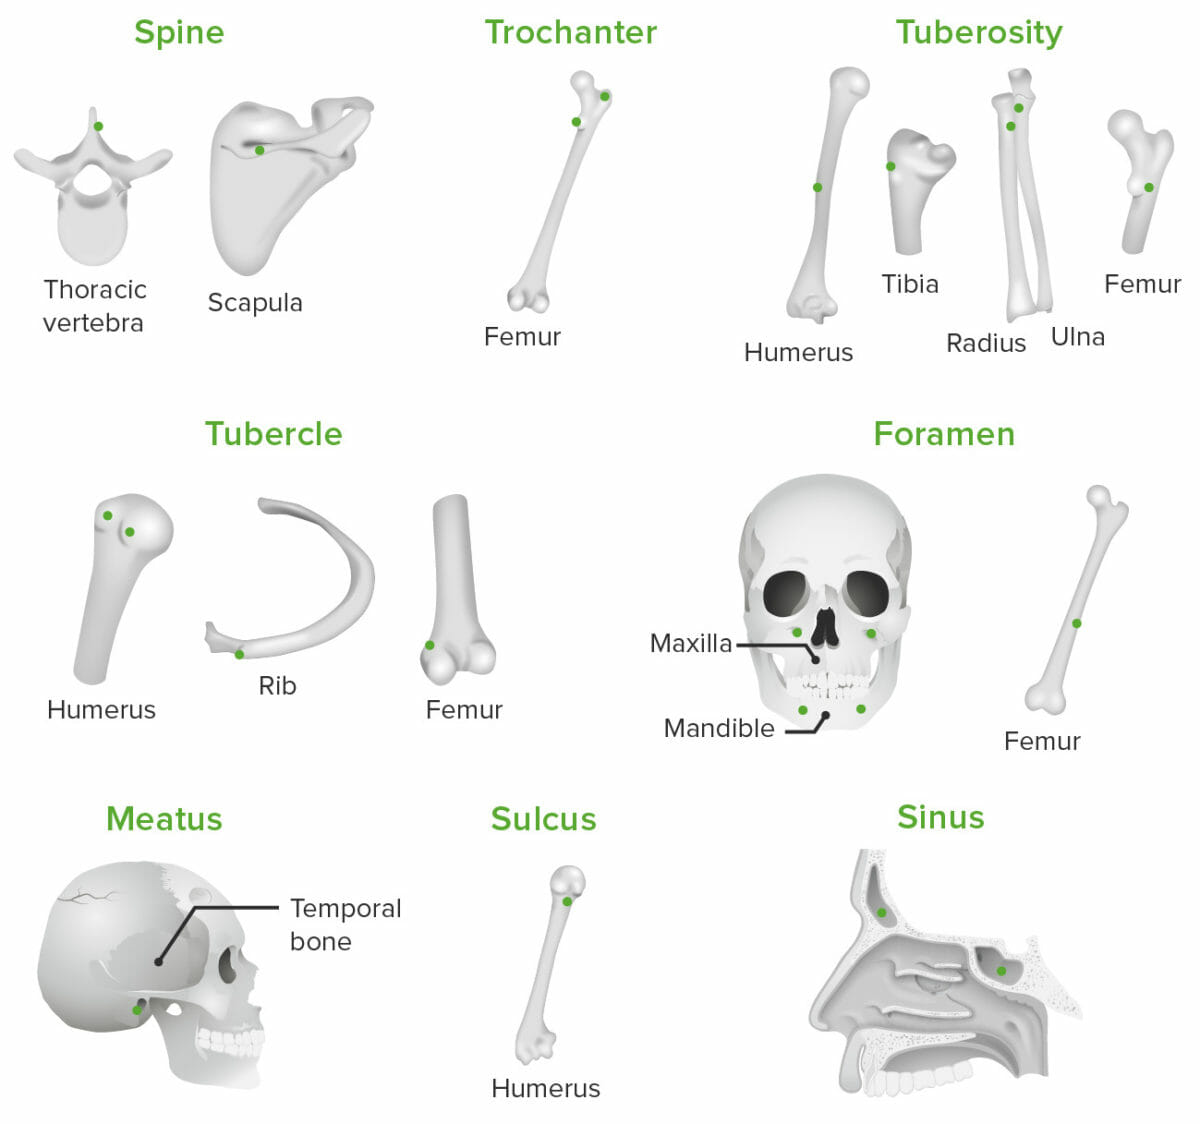 Various types of bone markings on different bones in the body